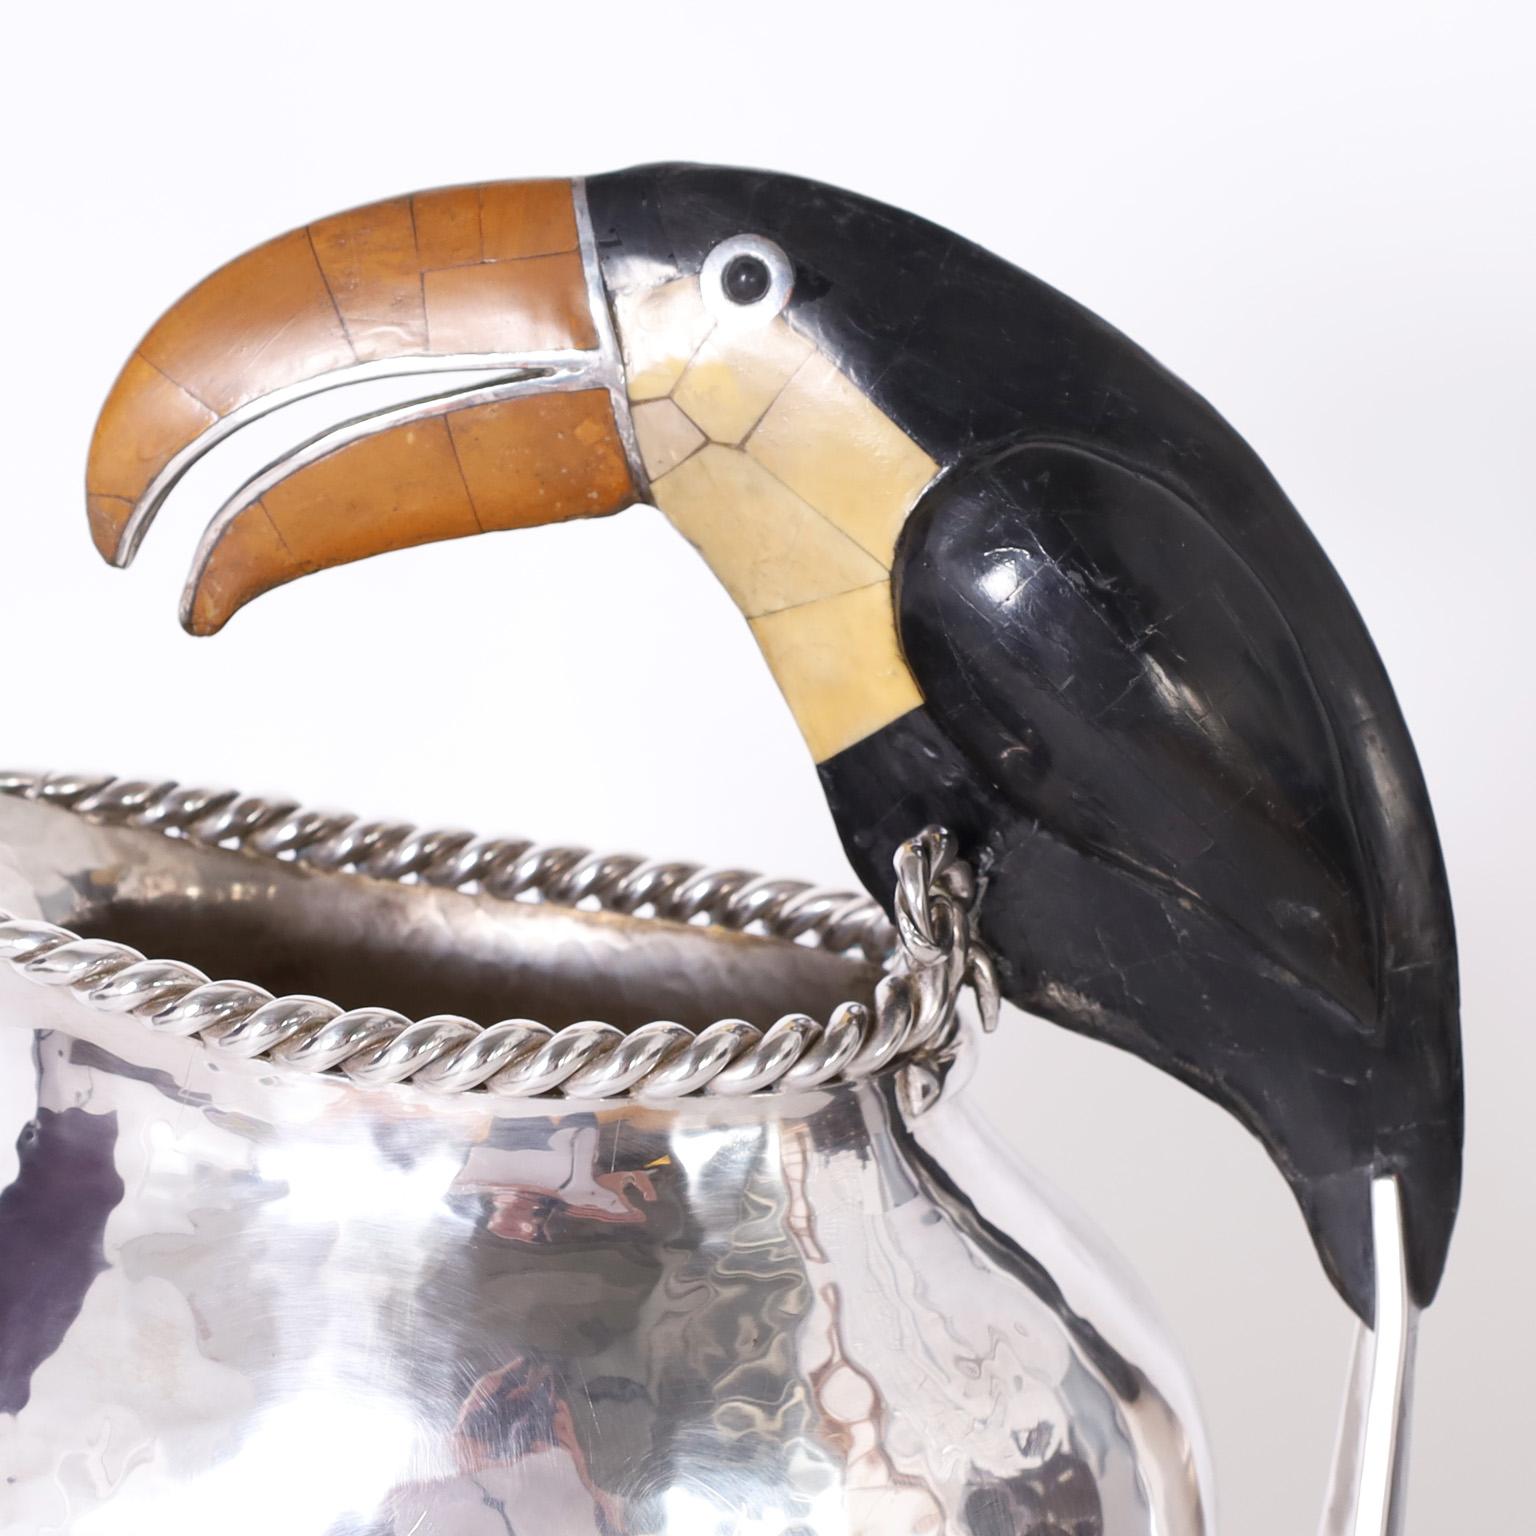 Hammered Silver Plate on Copper Pitcher with Toucan by Emilia Castillo